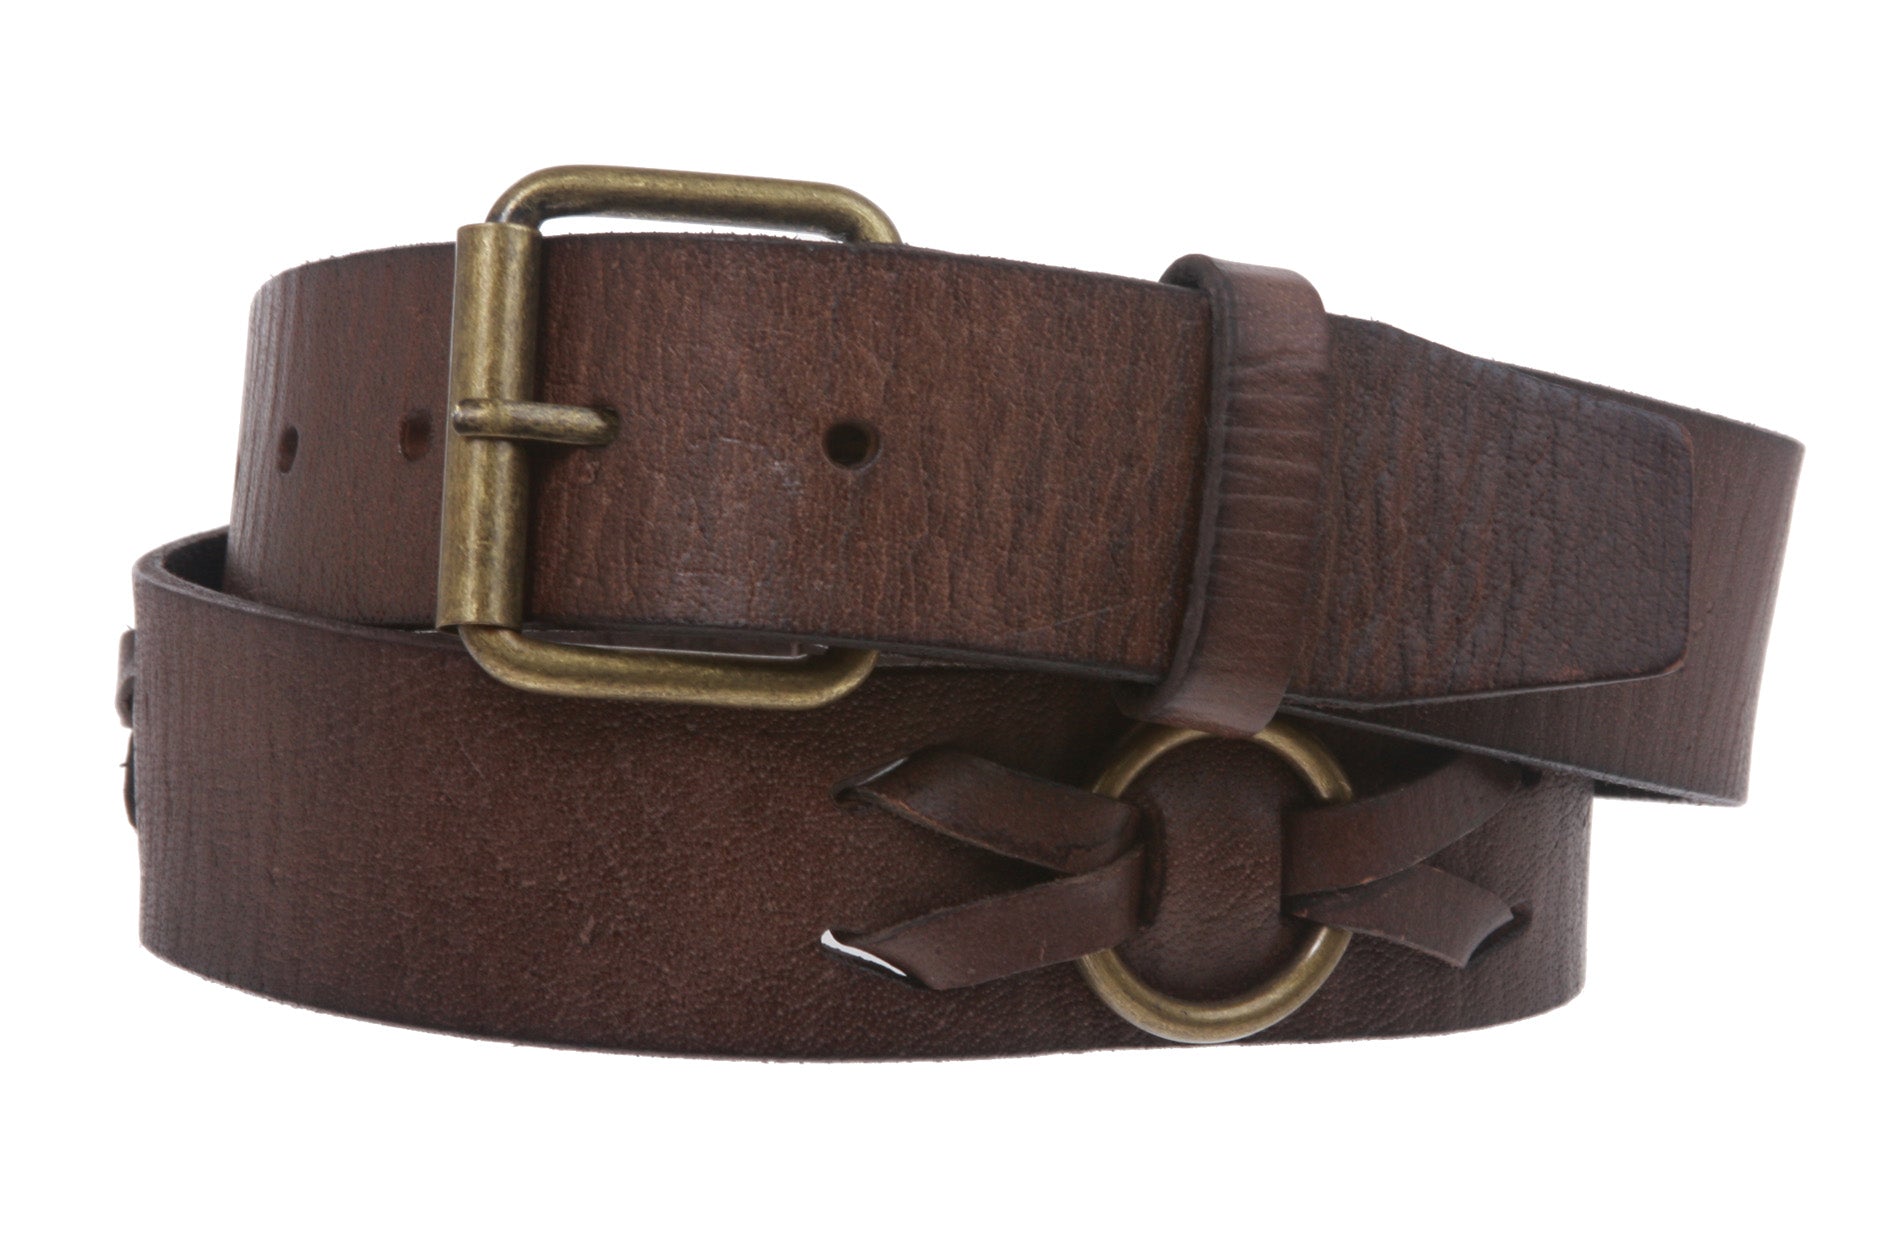 1 1/2" Snap On Oil-tanned Solid Leather Belt